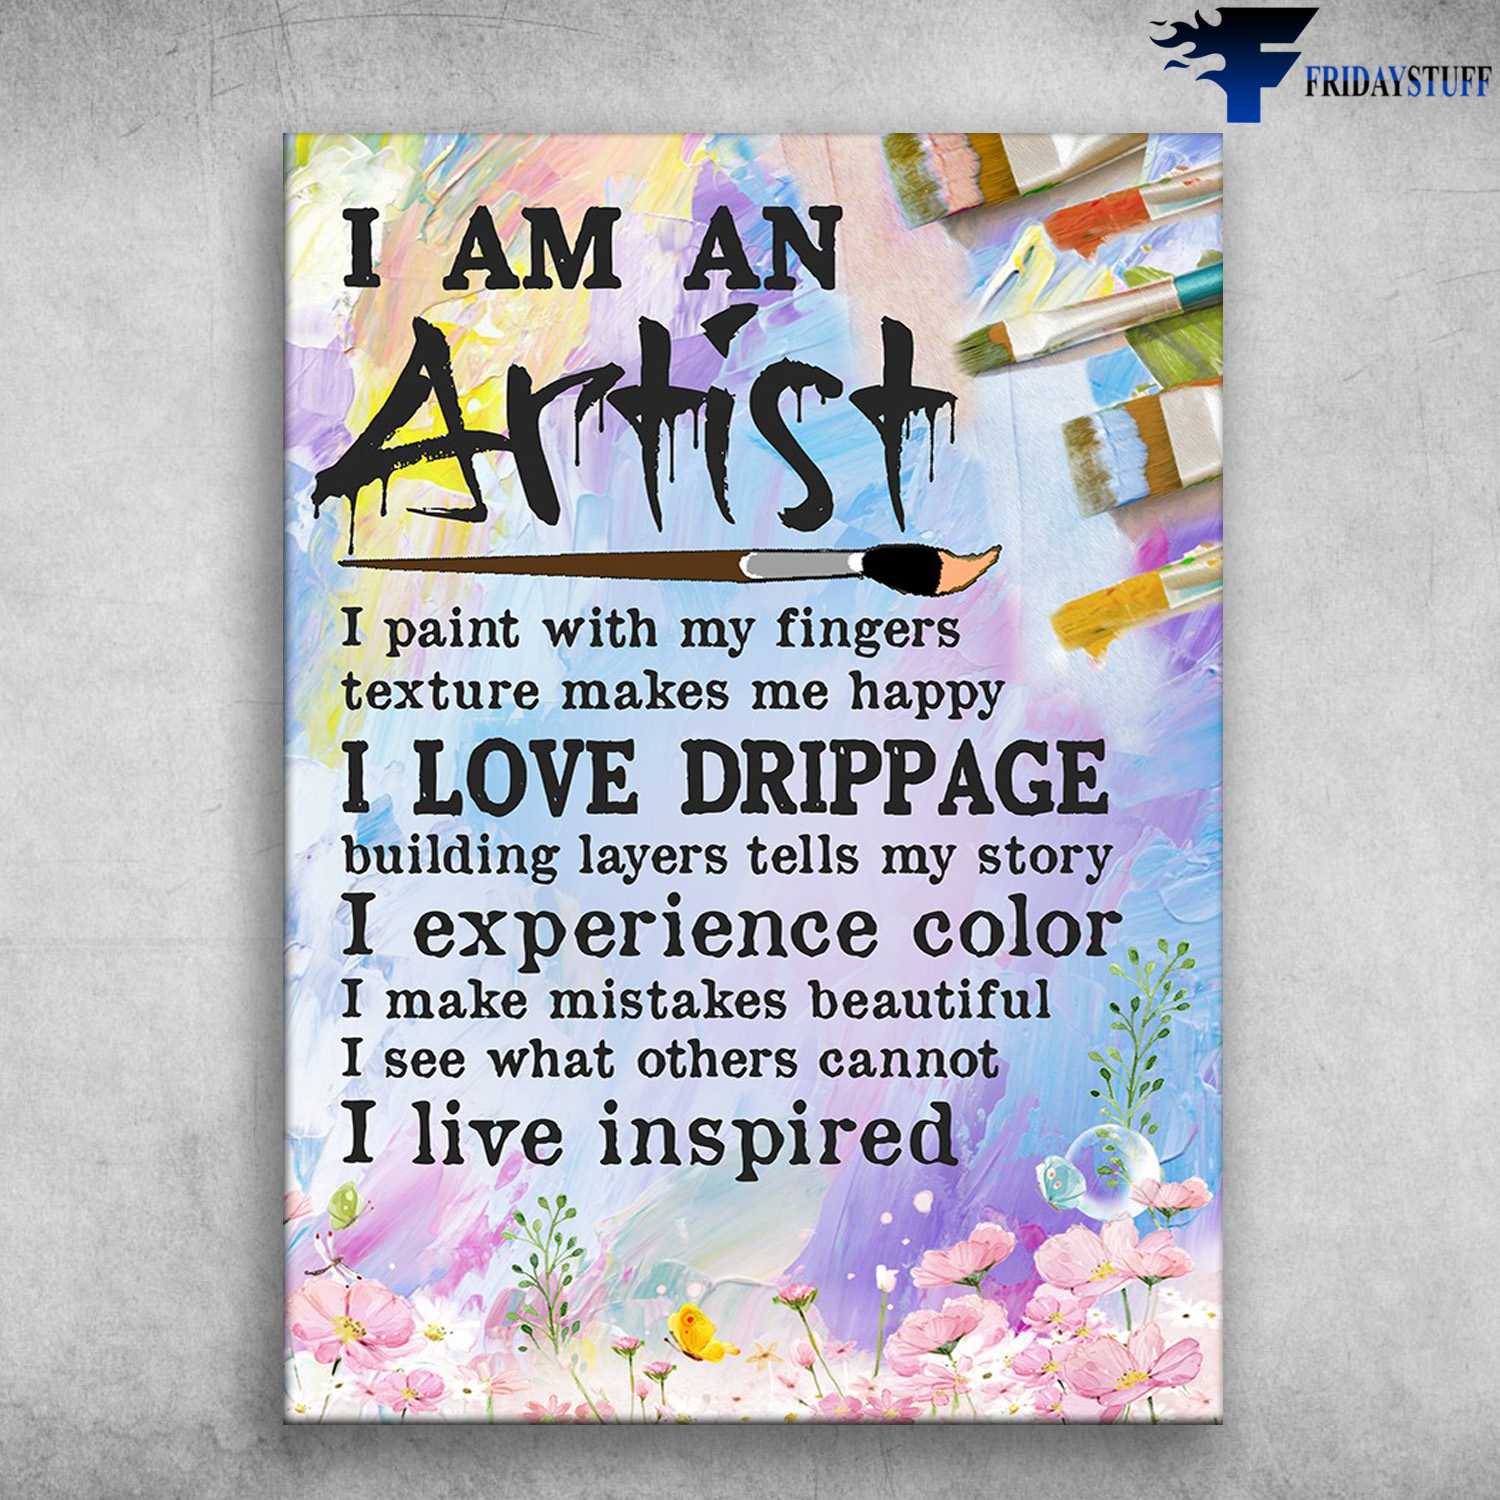 Art Class, Artist Poster, I Am An Artist, I Paint With My Fingers, Texture Makes Me Happy, I Love Makes Me Happy, I Love Drippage, Building Layers Tells My Story